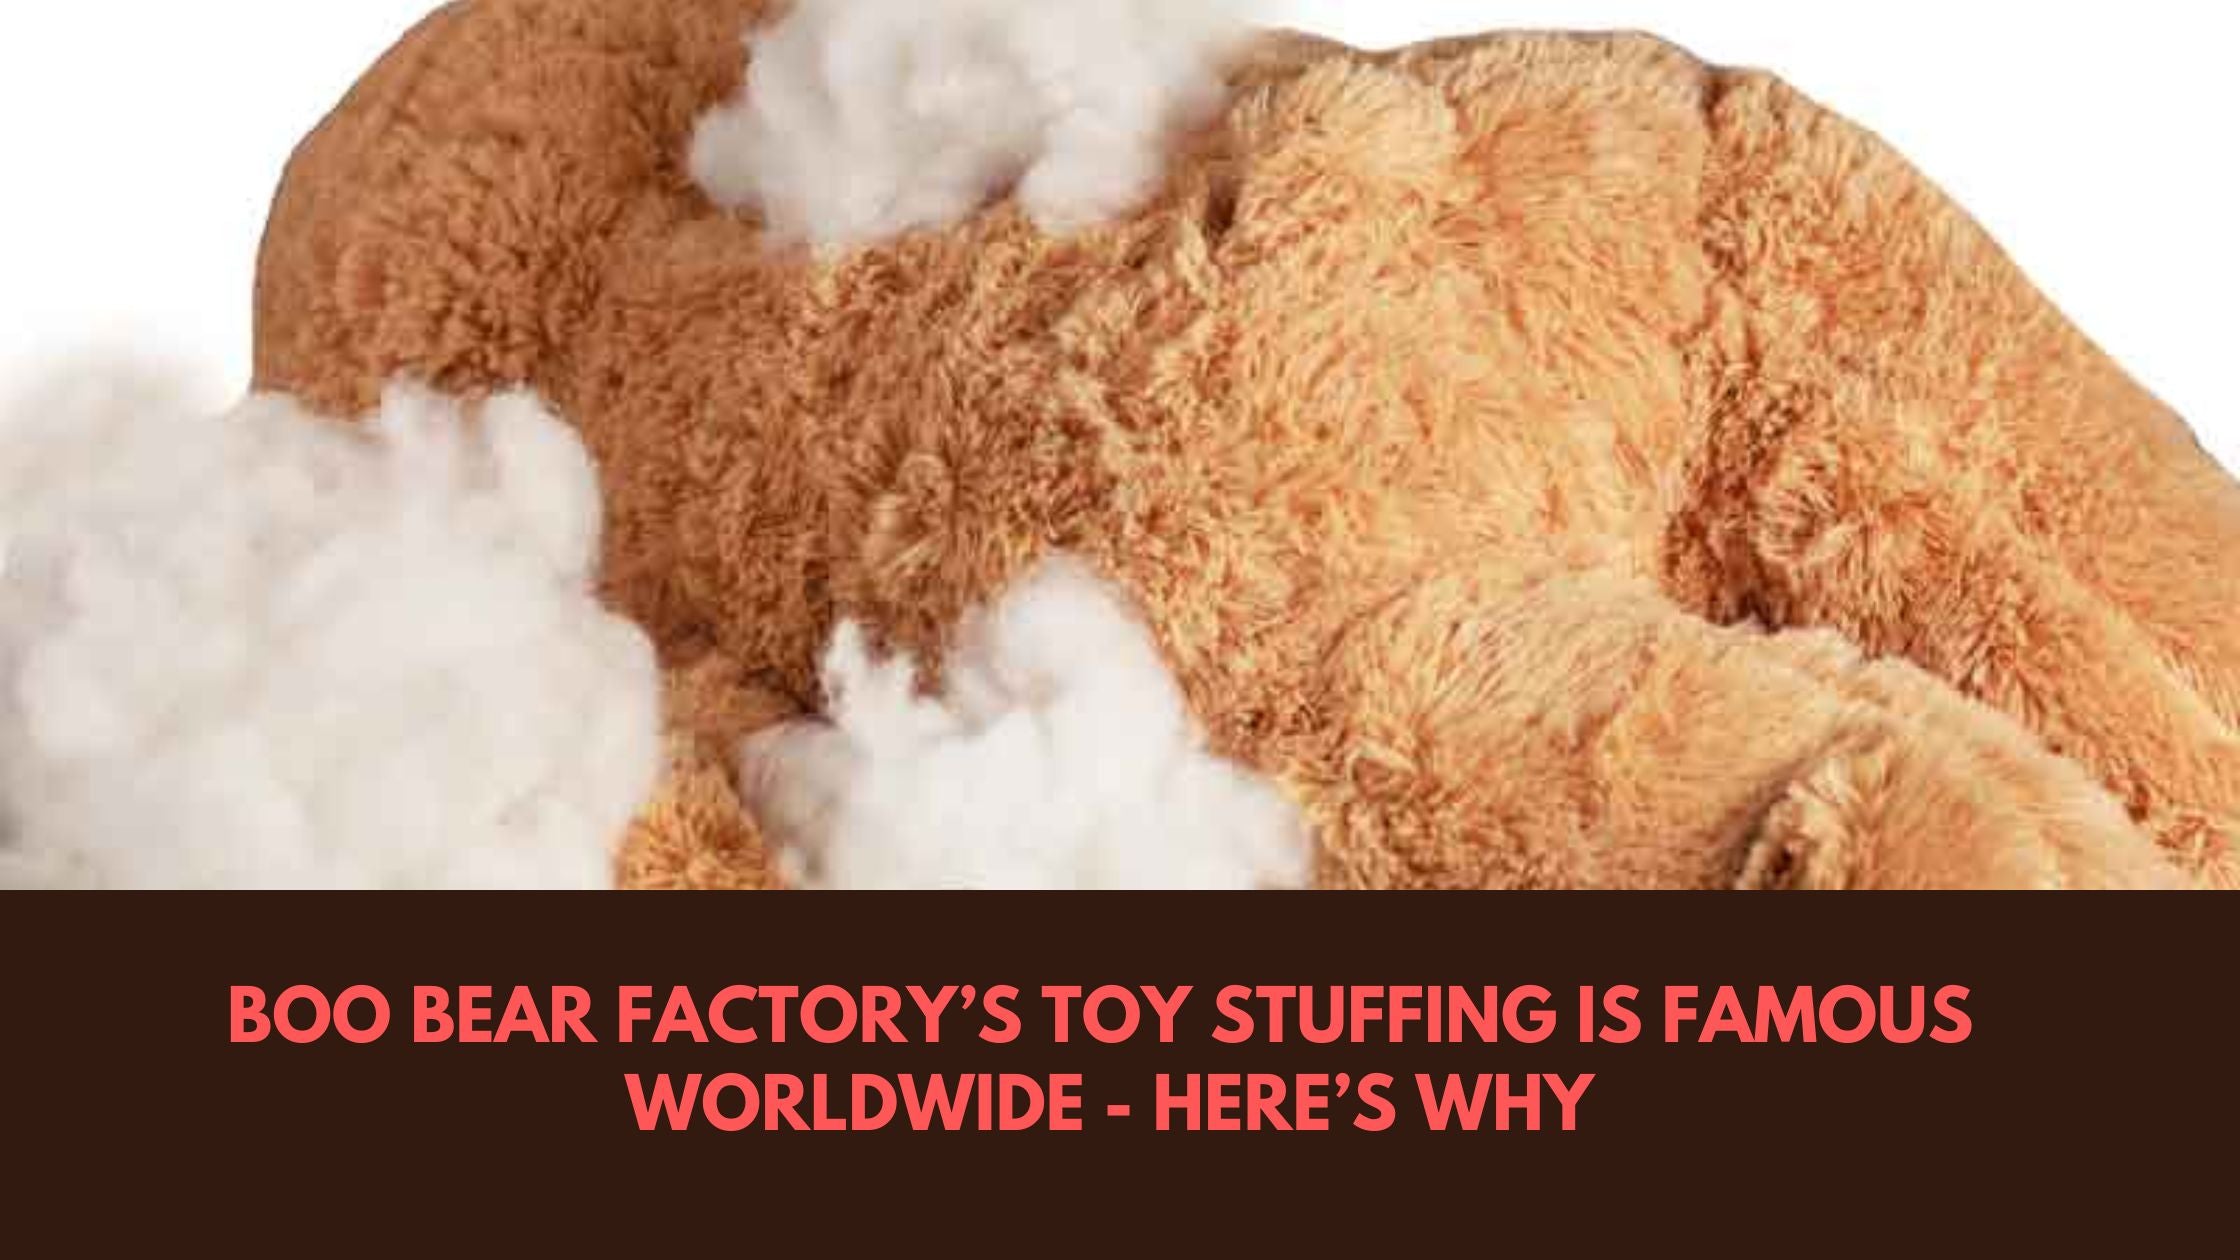 Boo Bear Factory's Toy Stuffing is Famous Worldwide - Here's Why